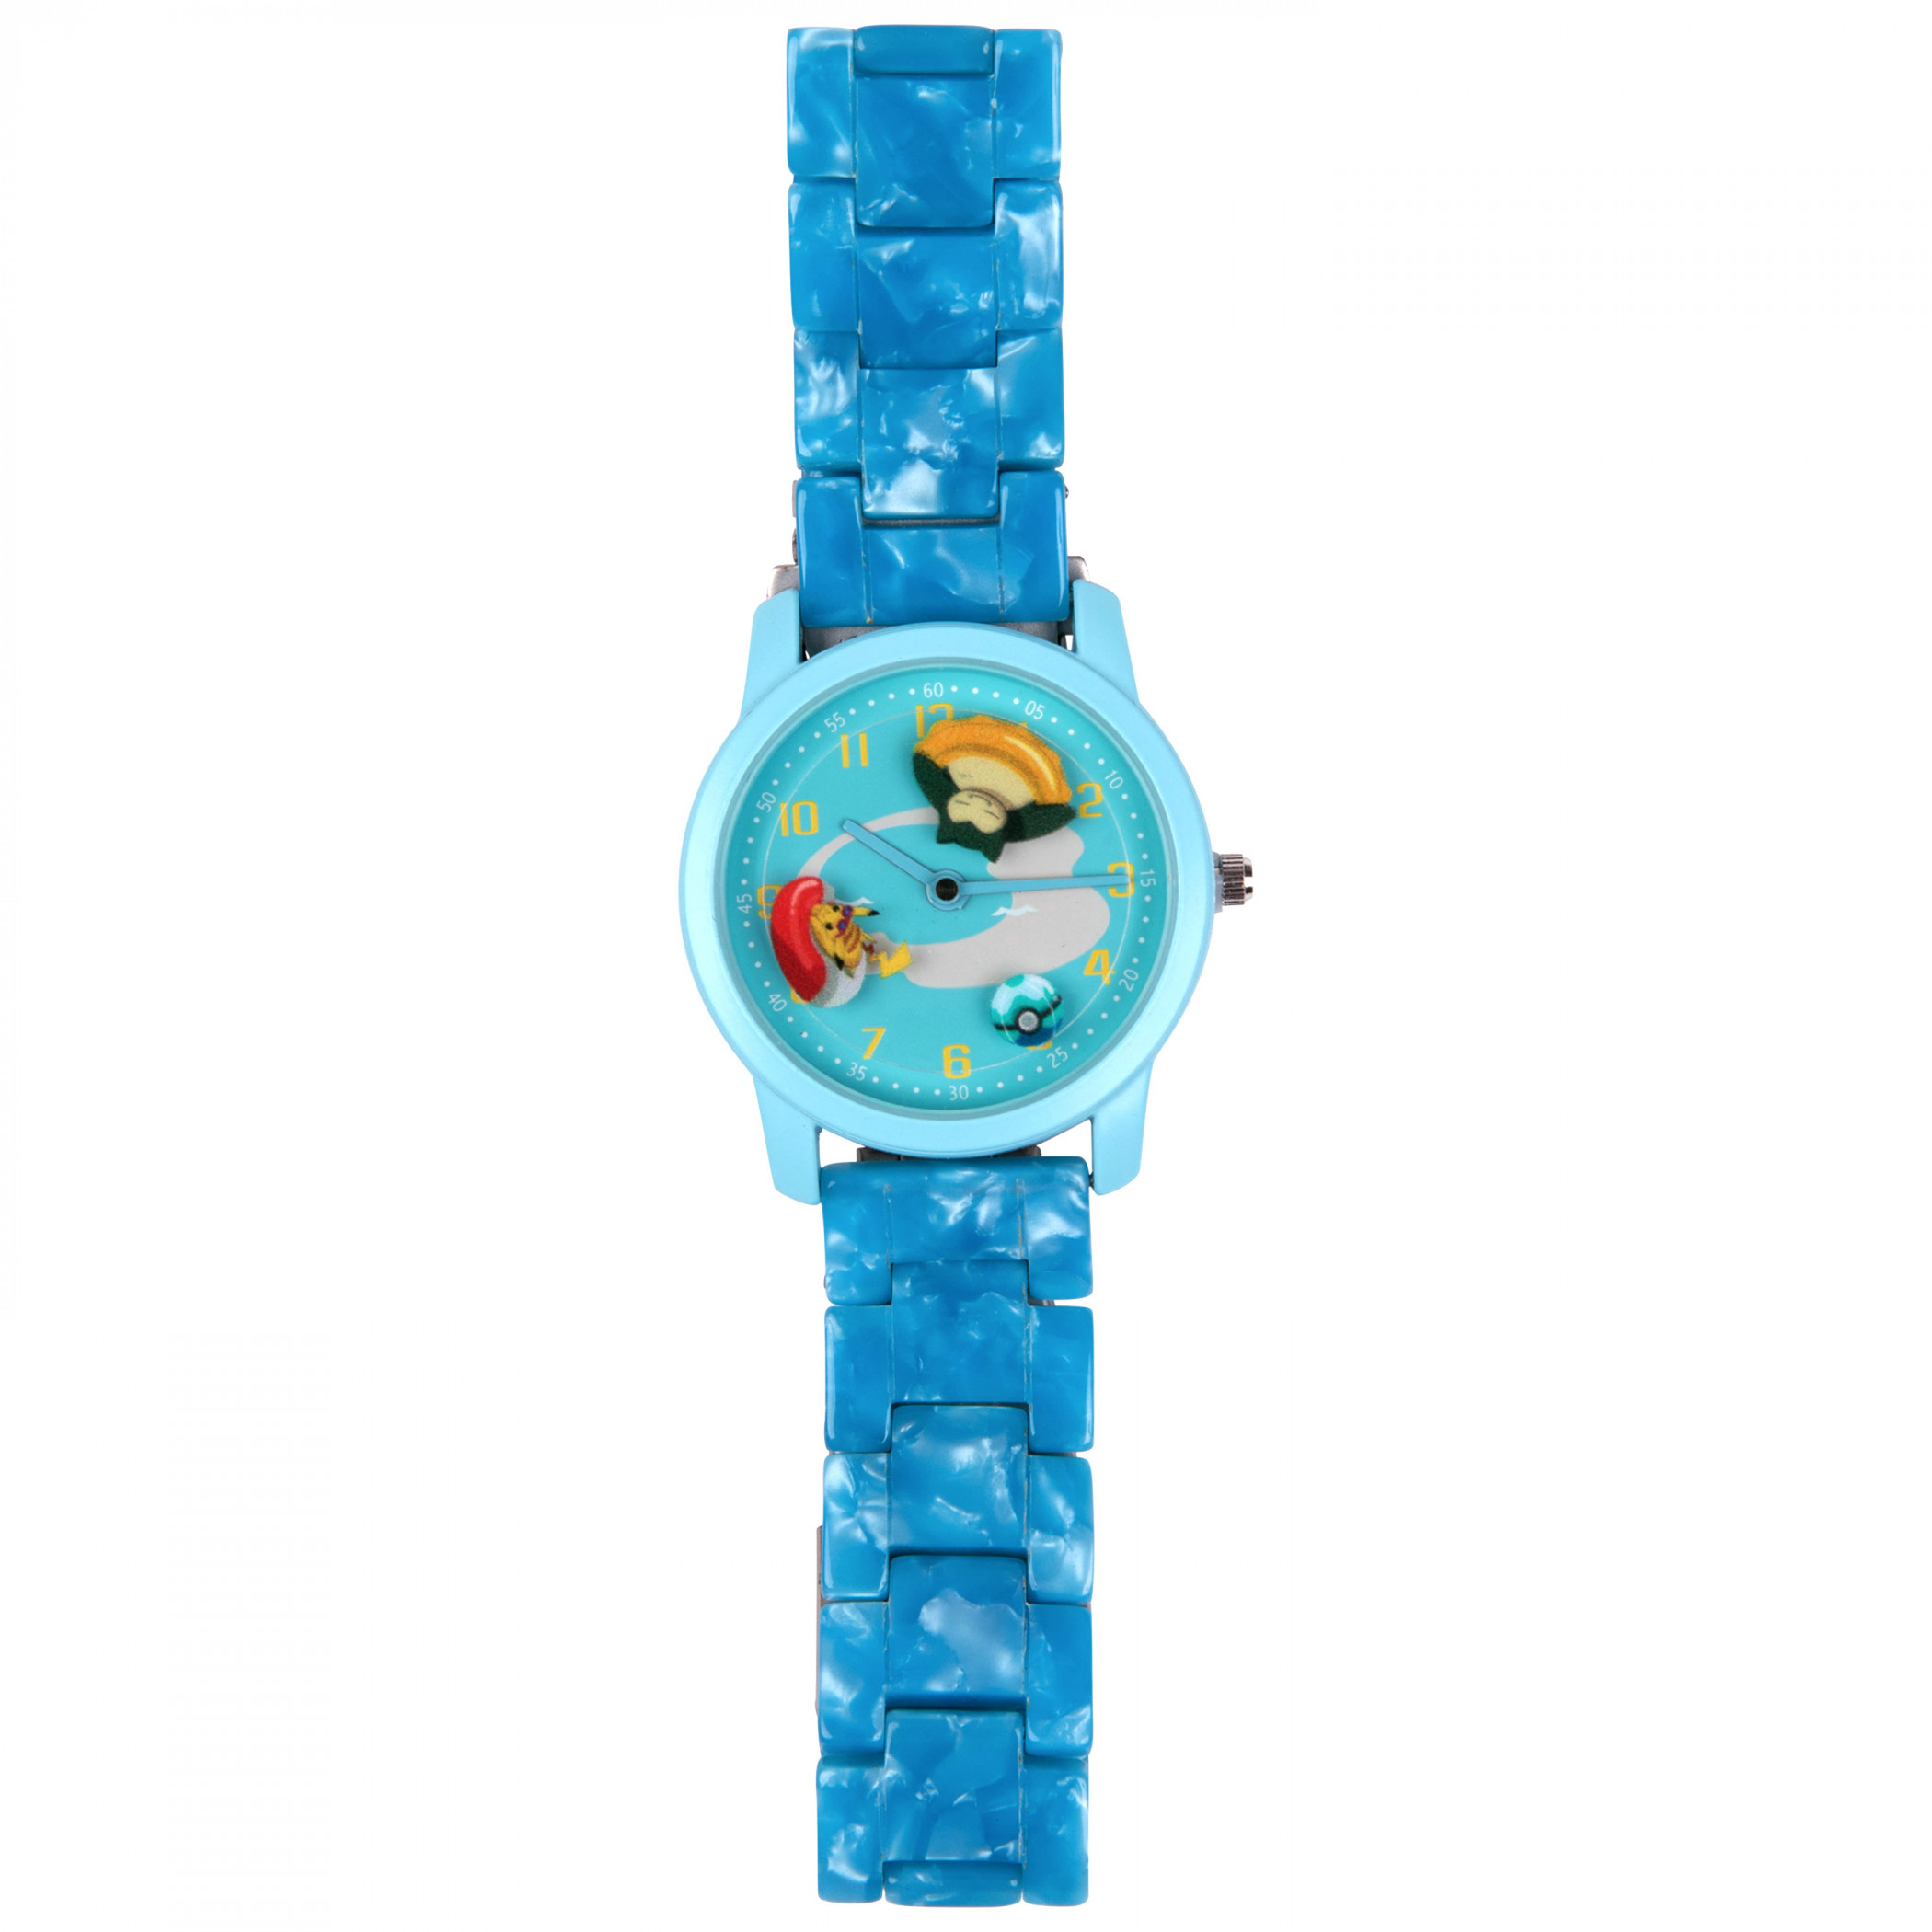 Pokemon Water Fun Time Watch with Rotating Watch Face